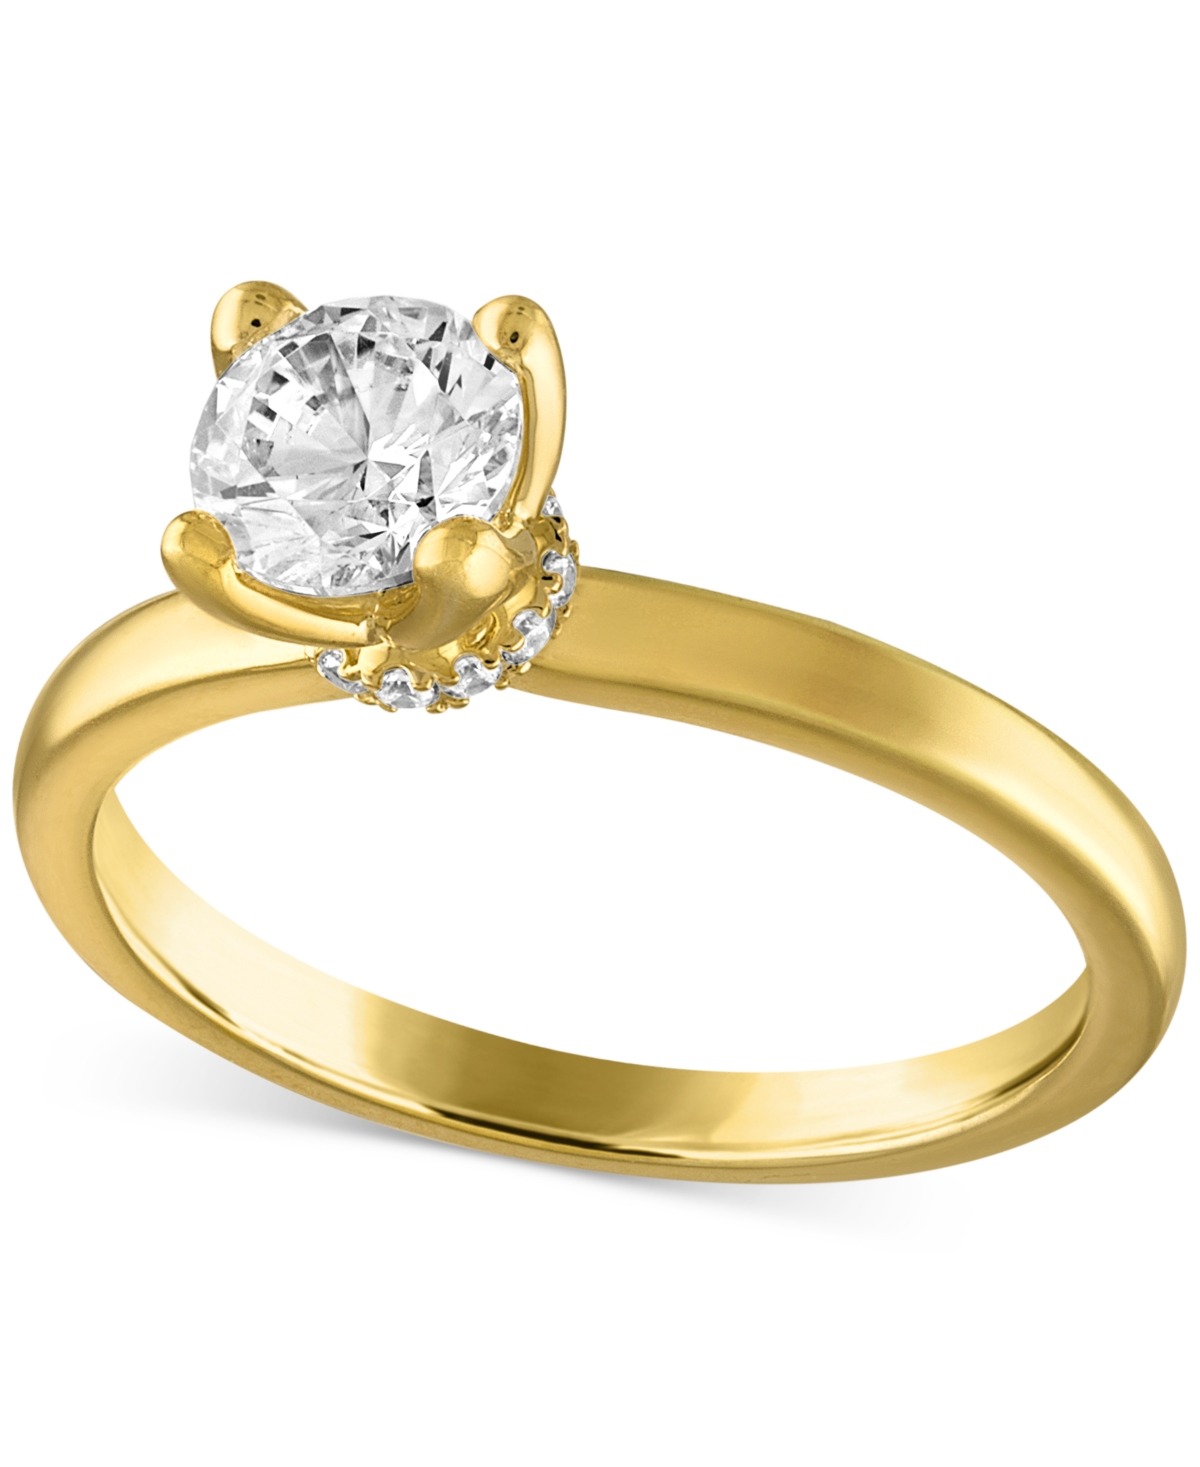 Certified Diamond Solitaire Engagement Ring (3/4 ct. t.w.) in 14k Gold featuring diamonds with the De Beers Code of Origin, Created for Macy's